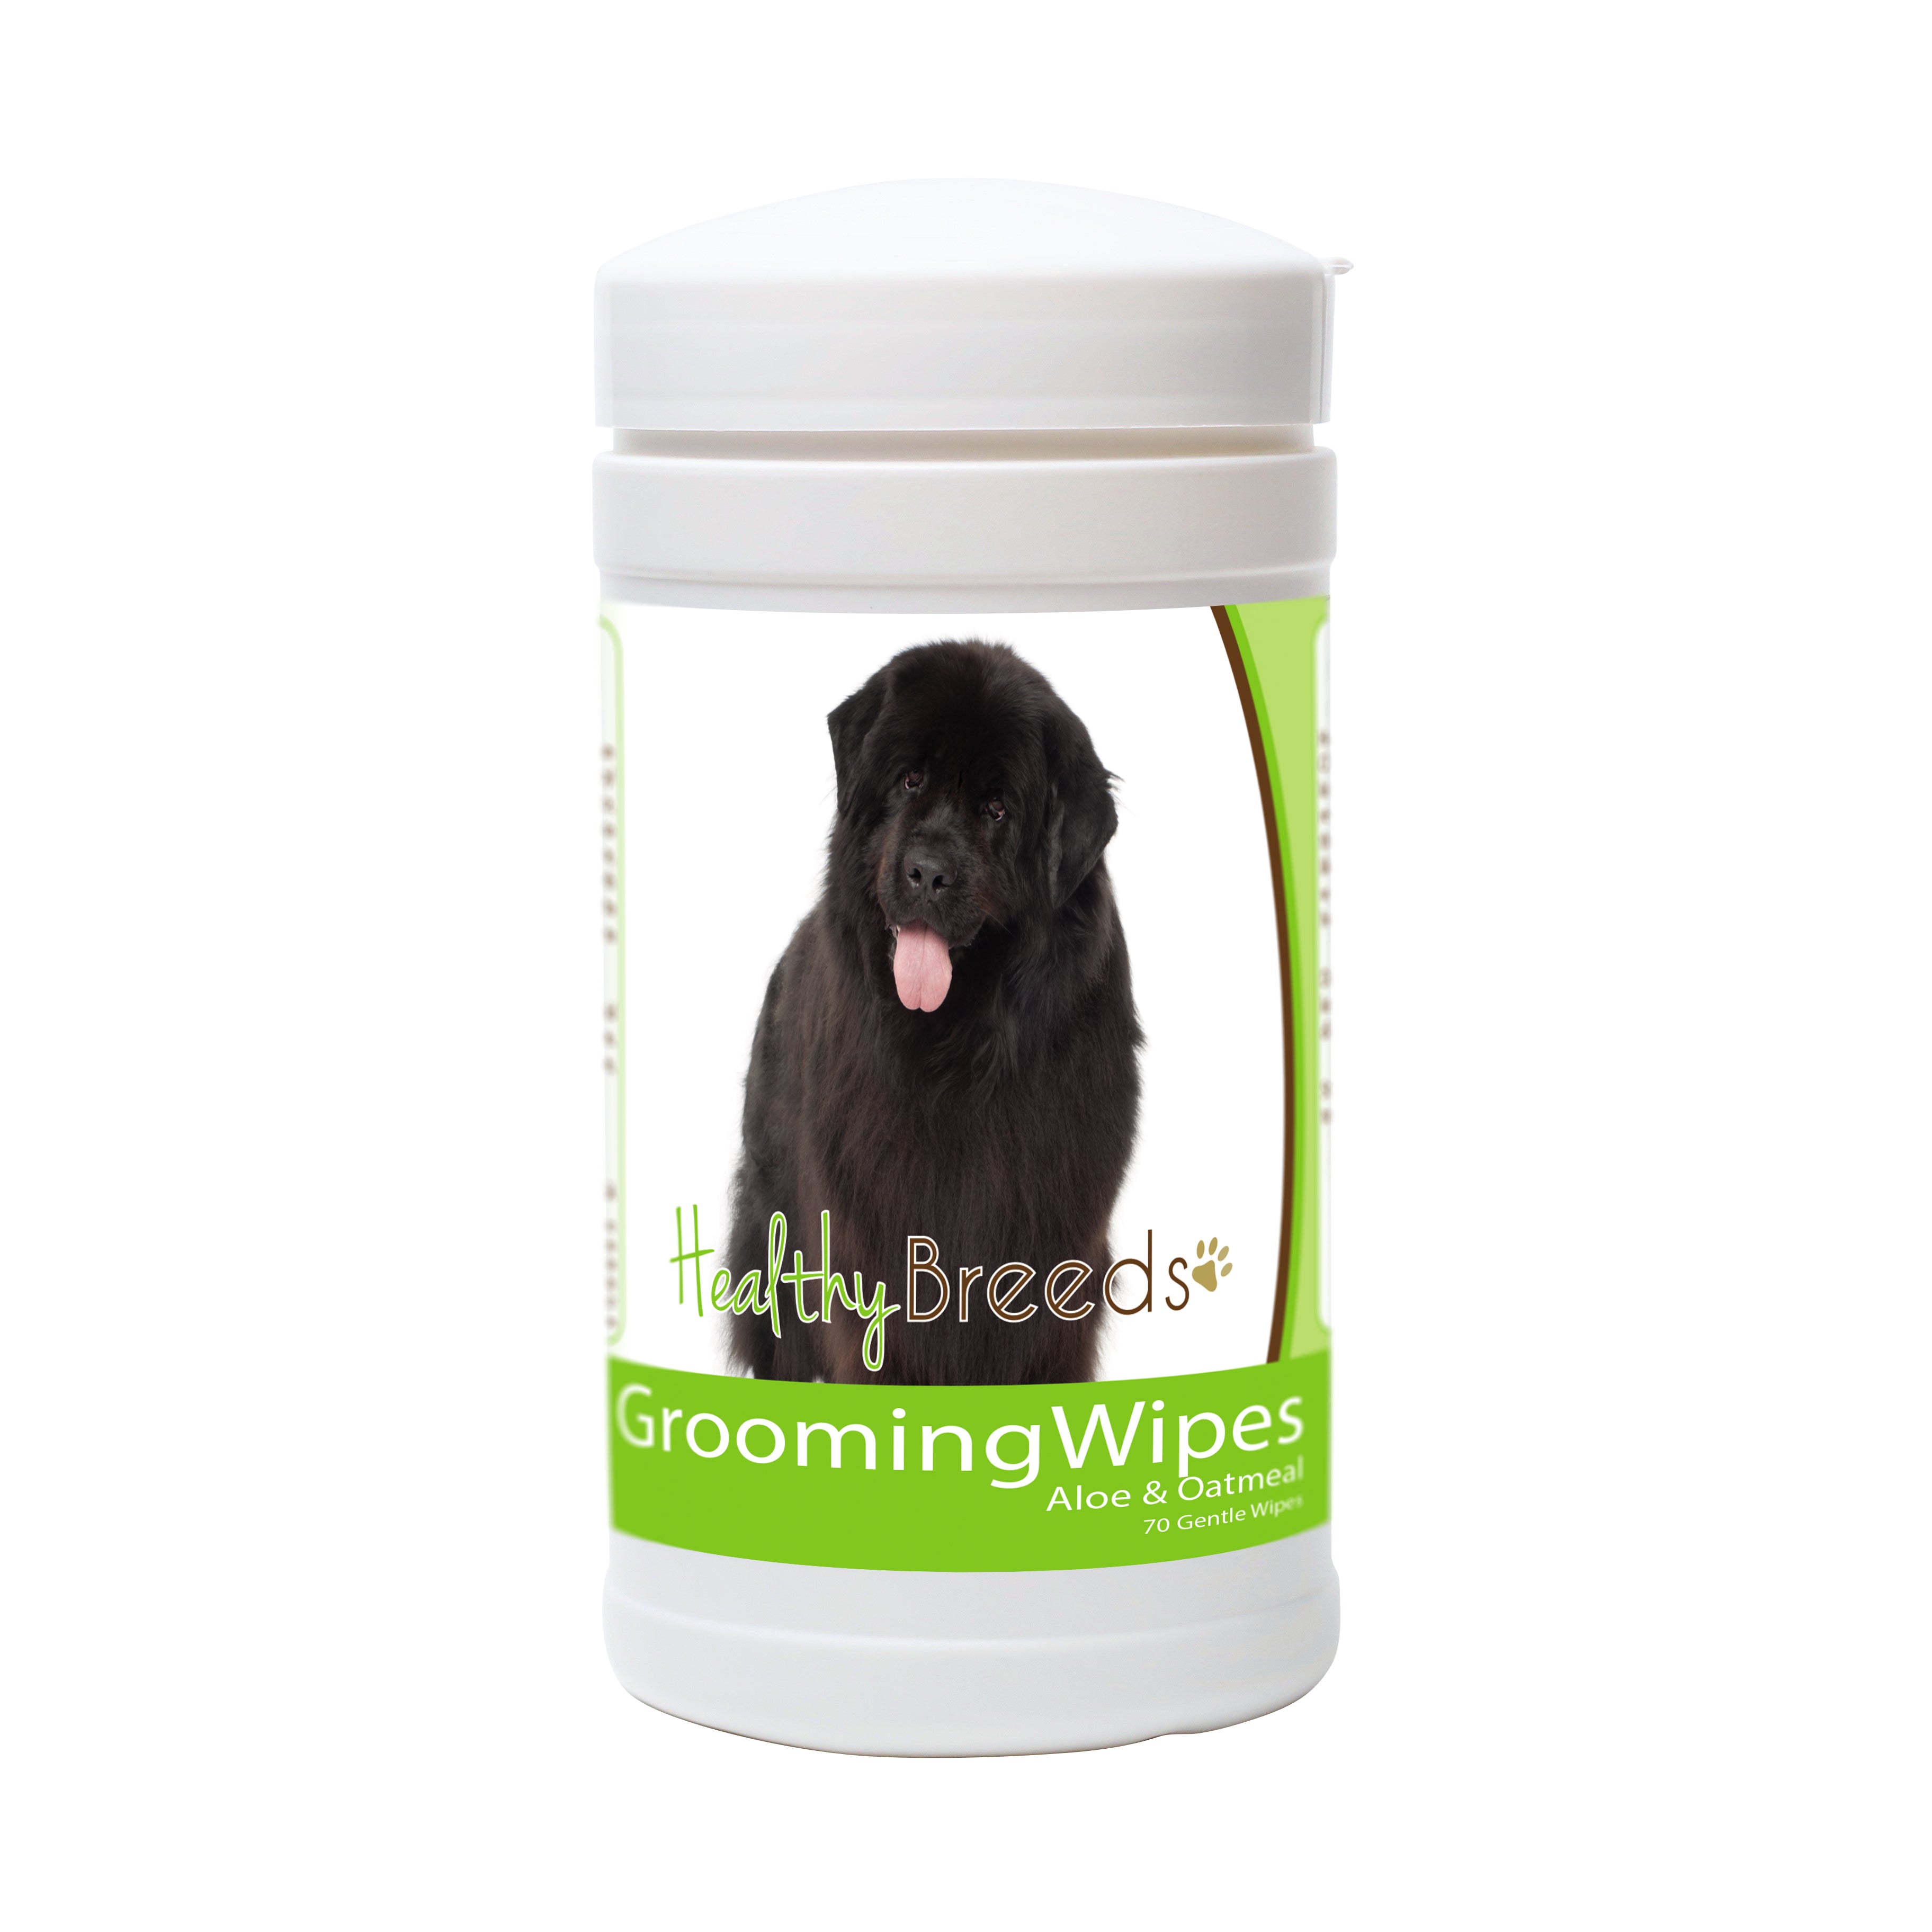 Newfoundland Grooming Wipes 70 Count